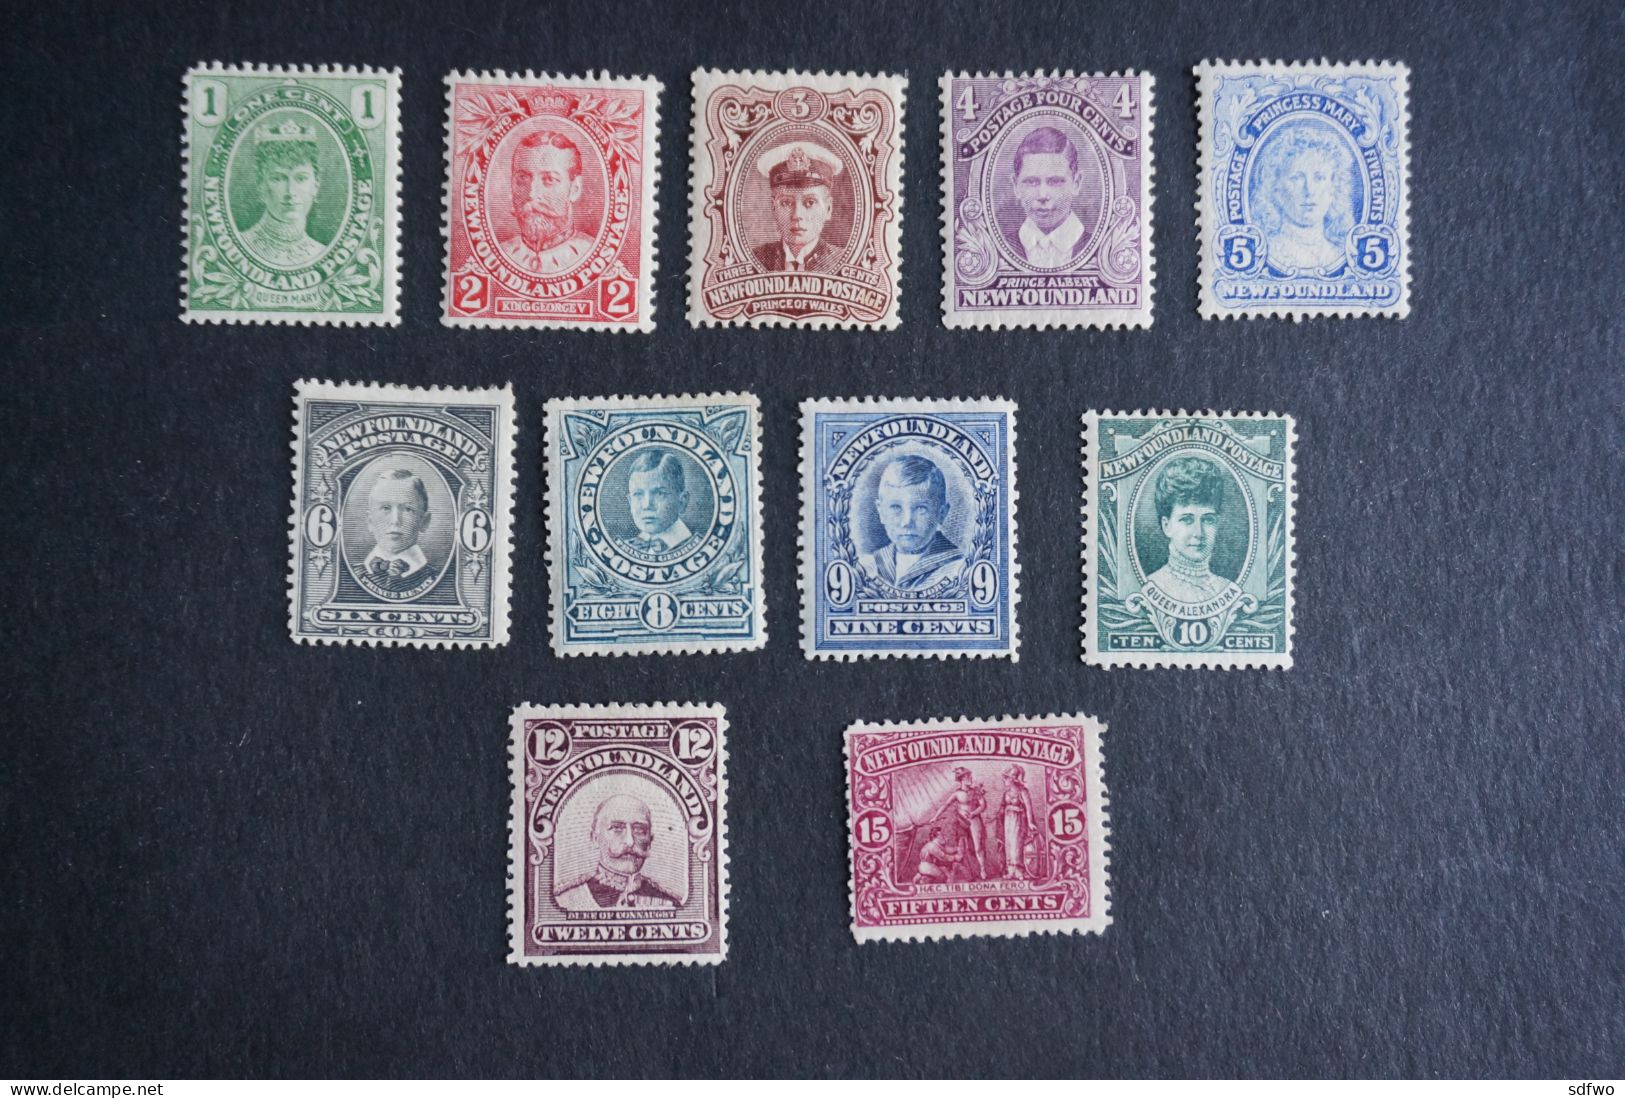 (G) Newfoundland Canada Stamps 1911 Royal Family Issue - # 104-14 (MH) - 1865-1902